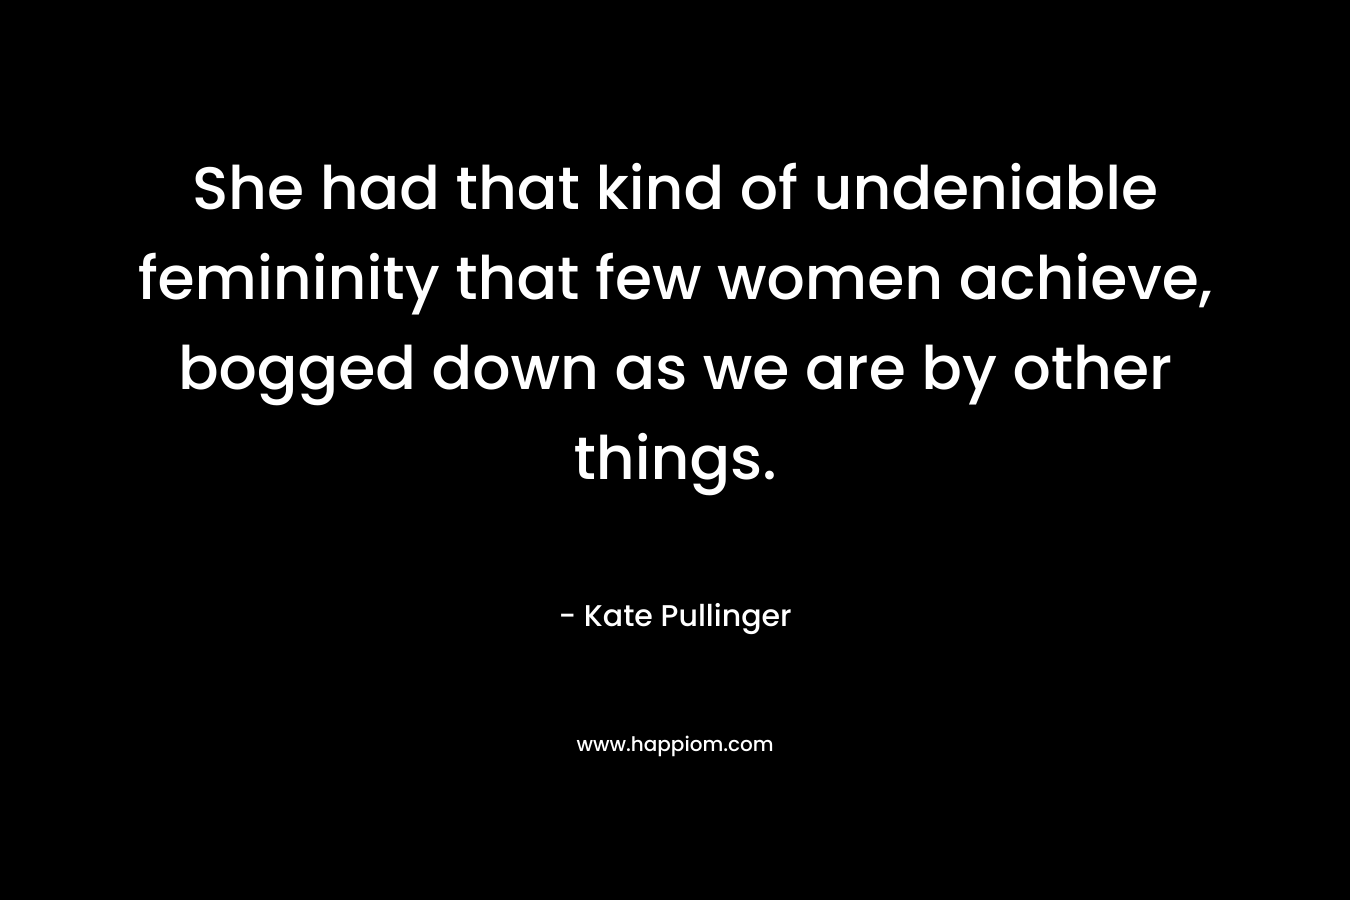 She had that kind of undeniable femininity that few women achieve, bogged down as we are by other things. – Kate Pullinger